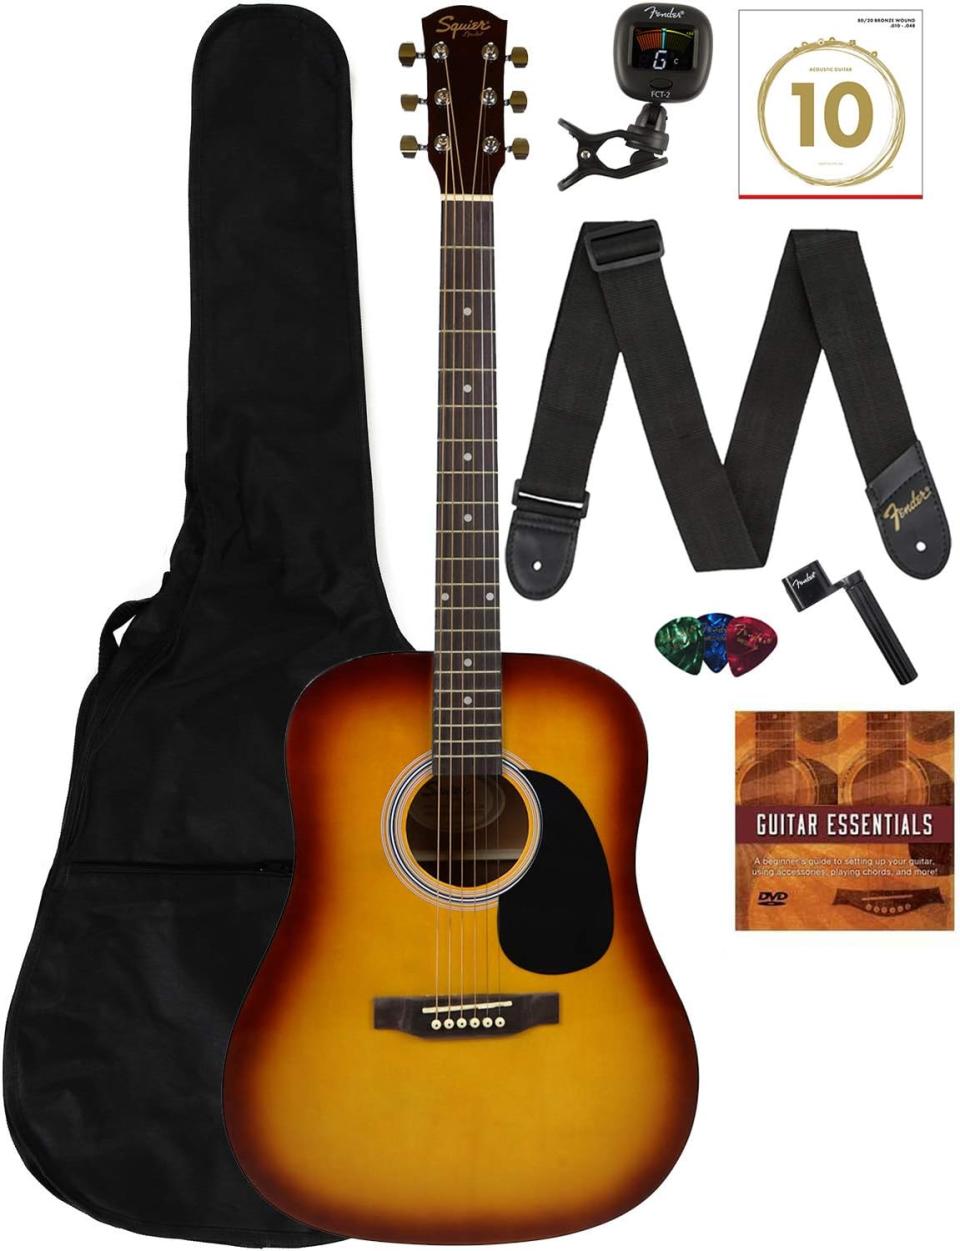 brown acoustic guitar with strap and carrying case